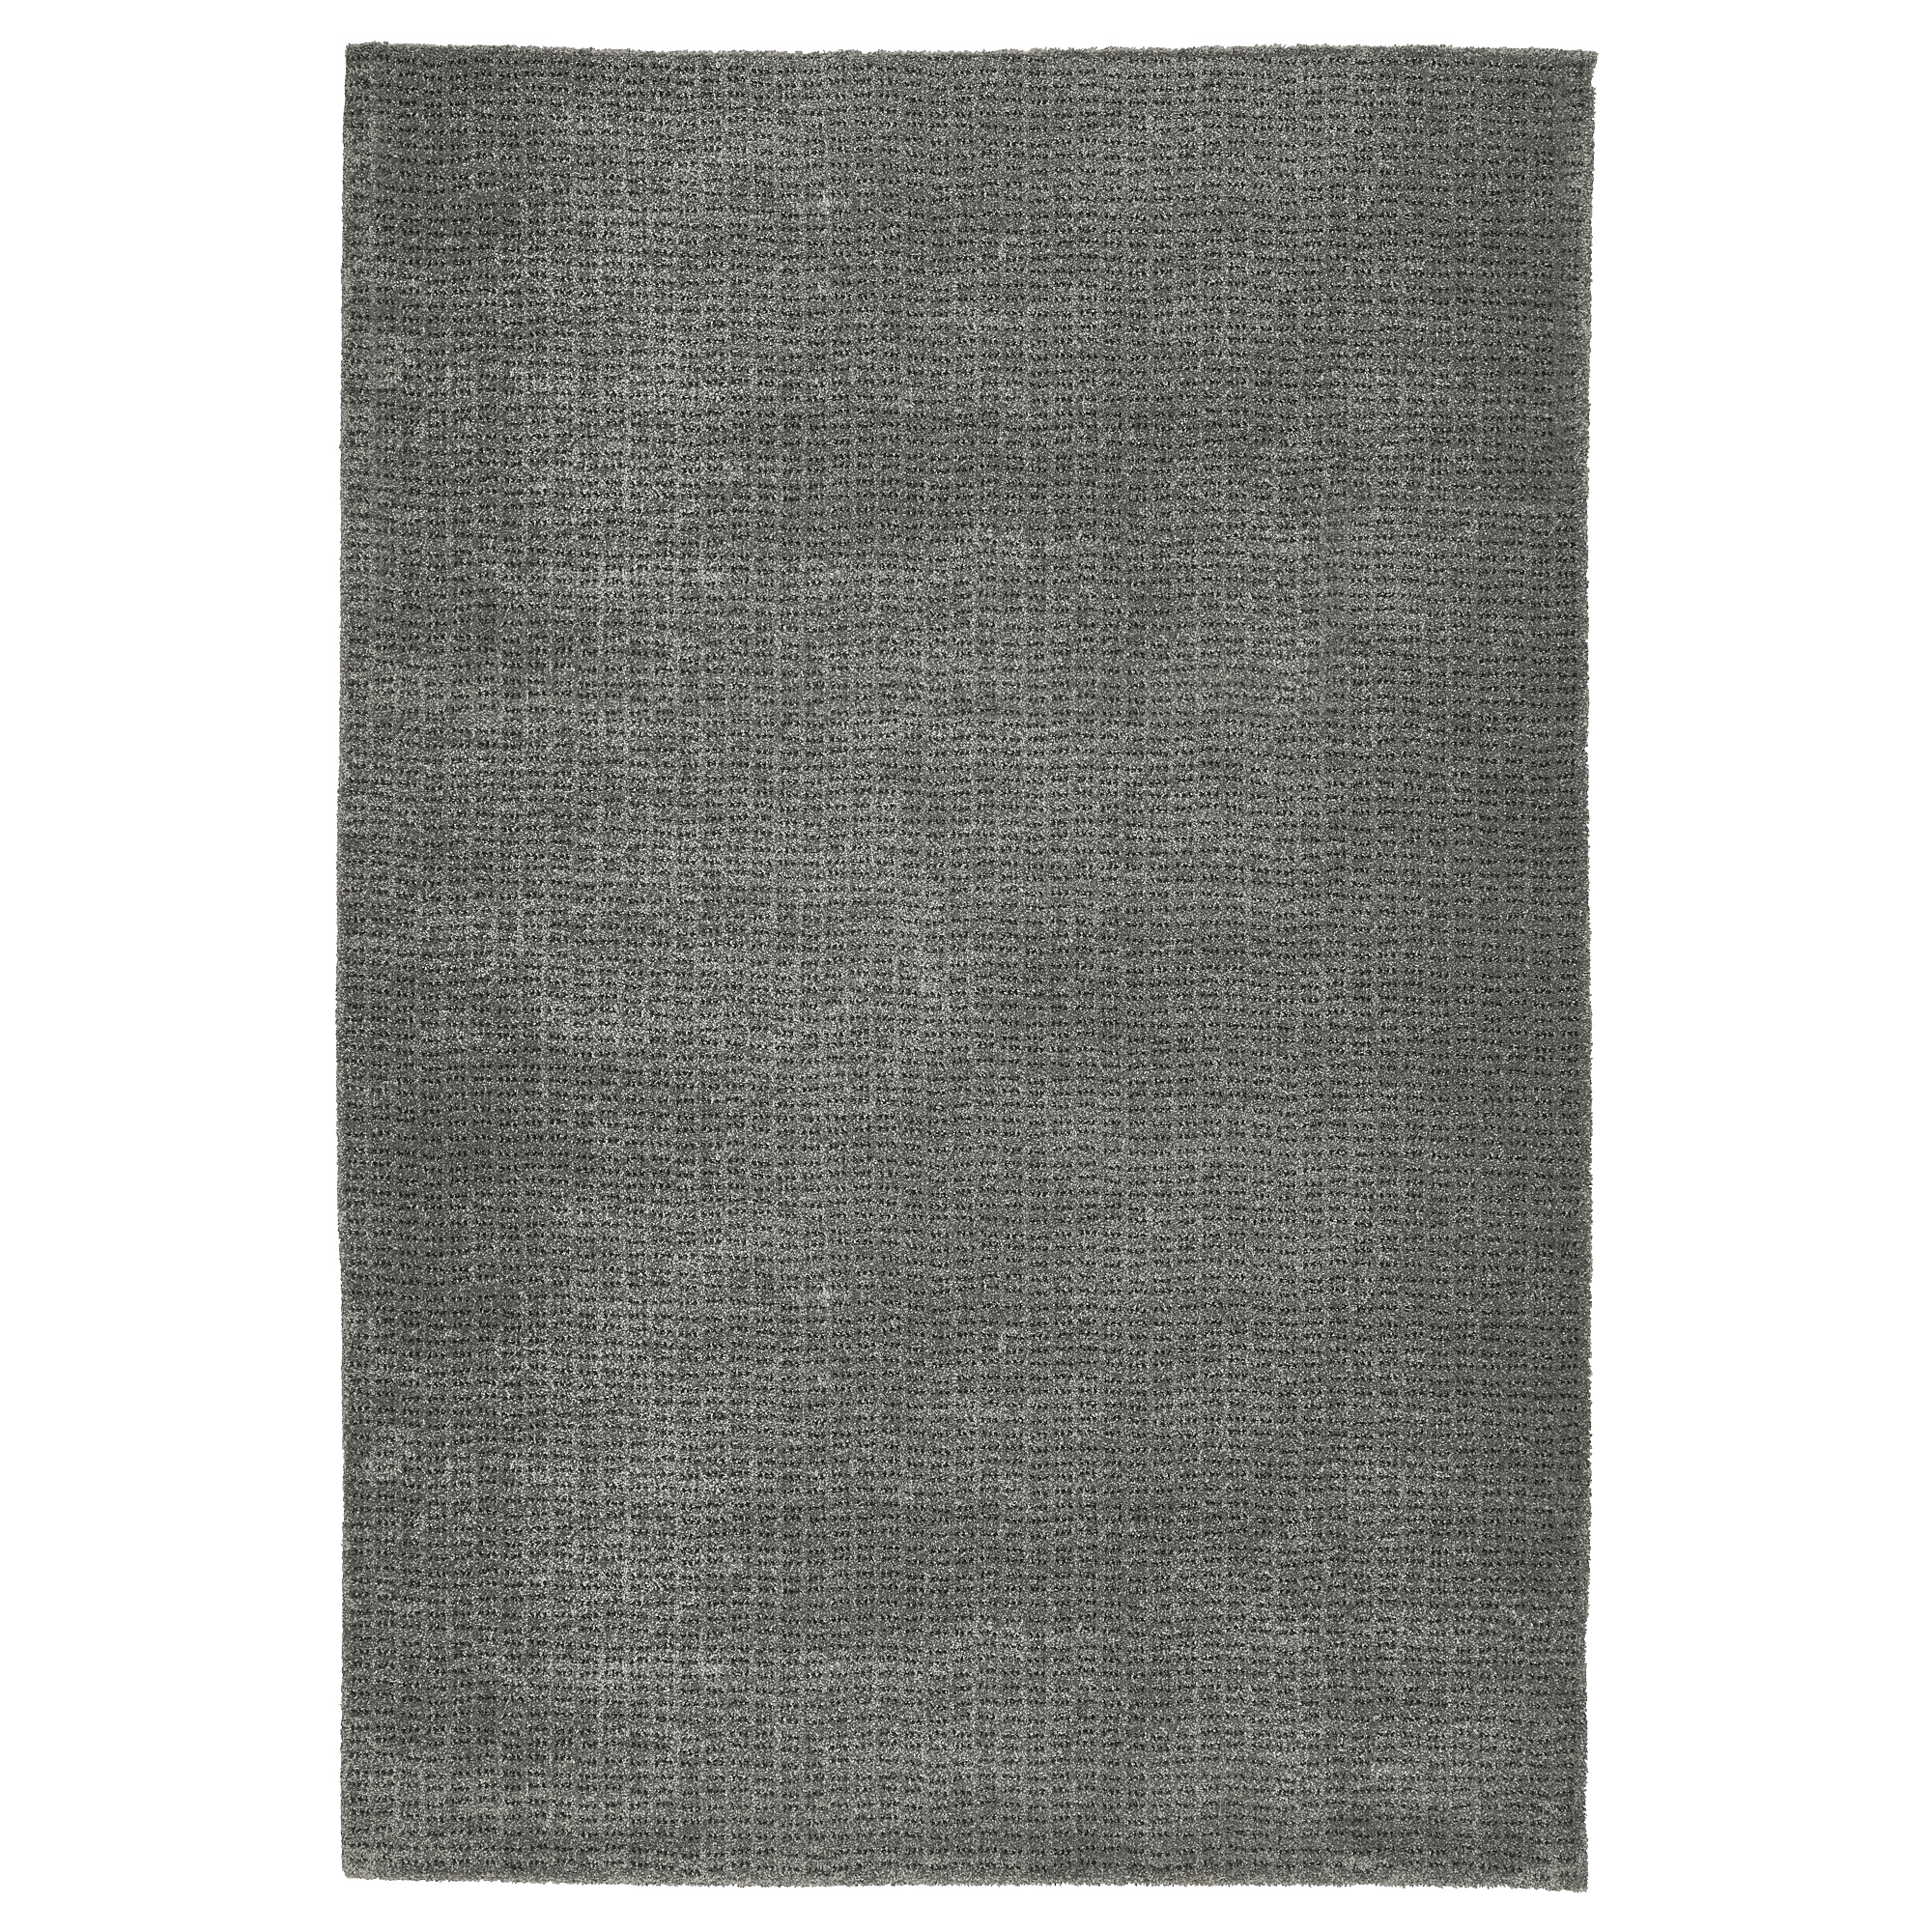 LANGSTED rug, low pile